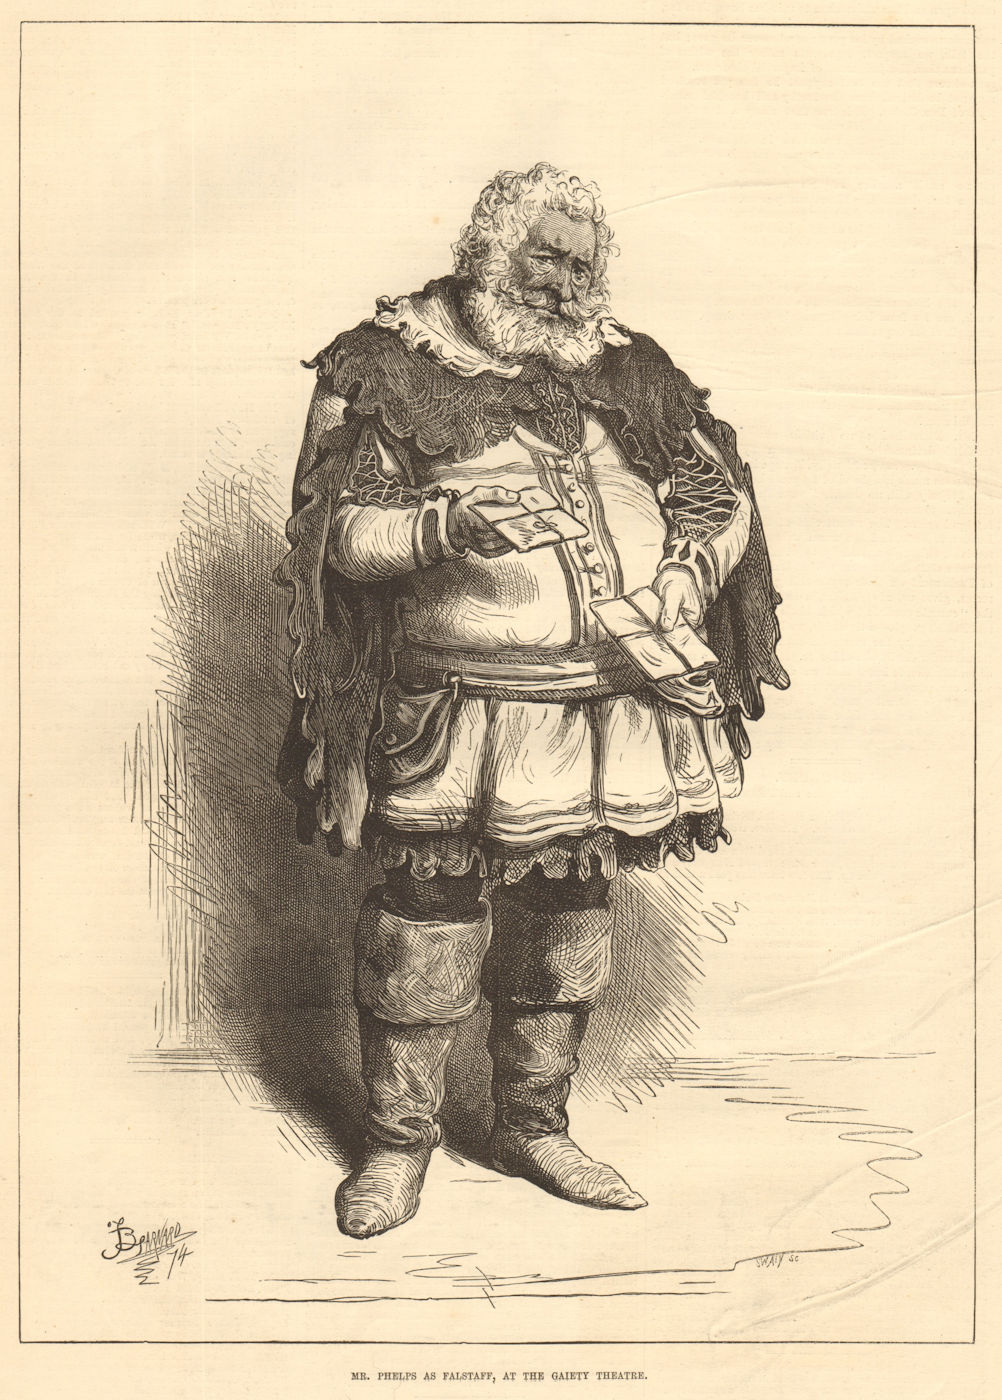 Mr. Phelps, as Falstaff, at the Gallery Theatre. Shakespeare 1875 old print